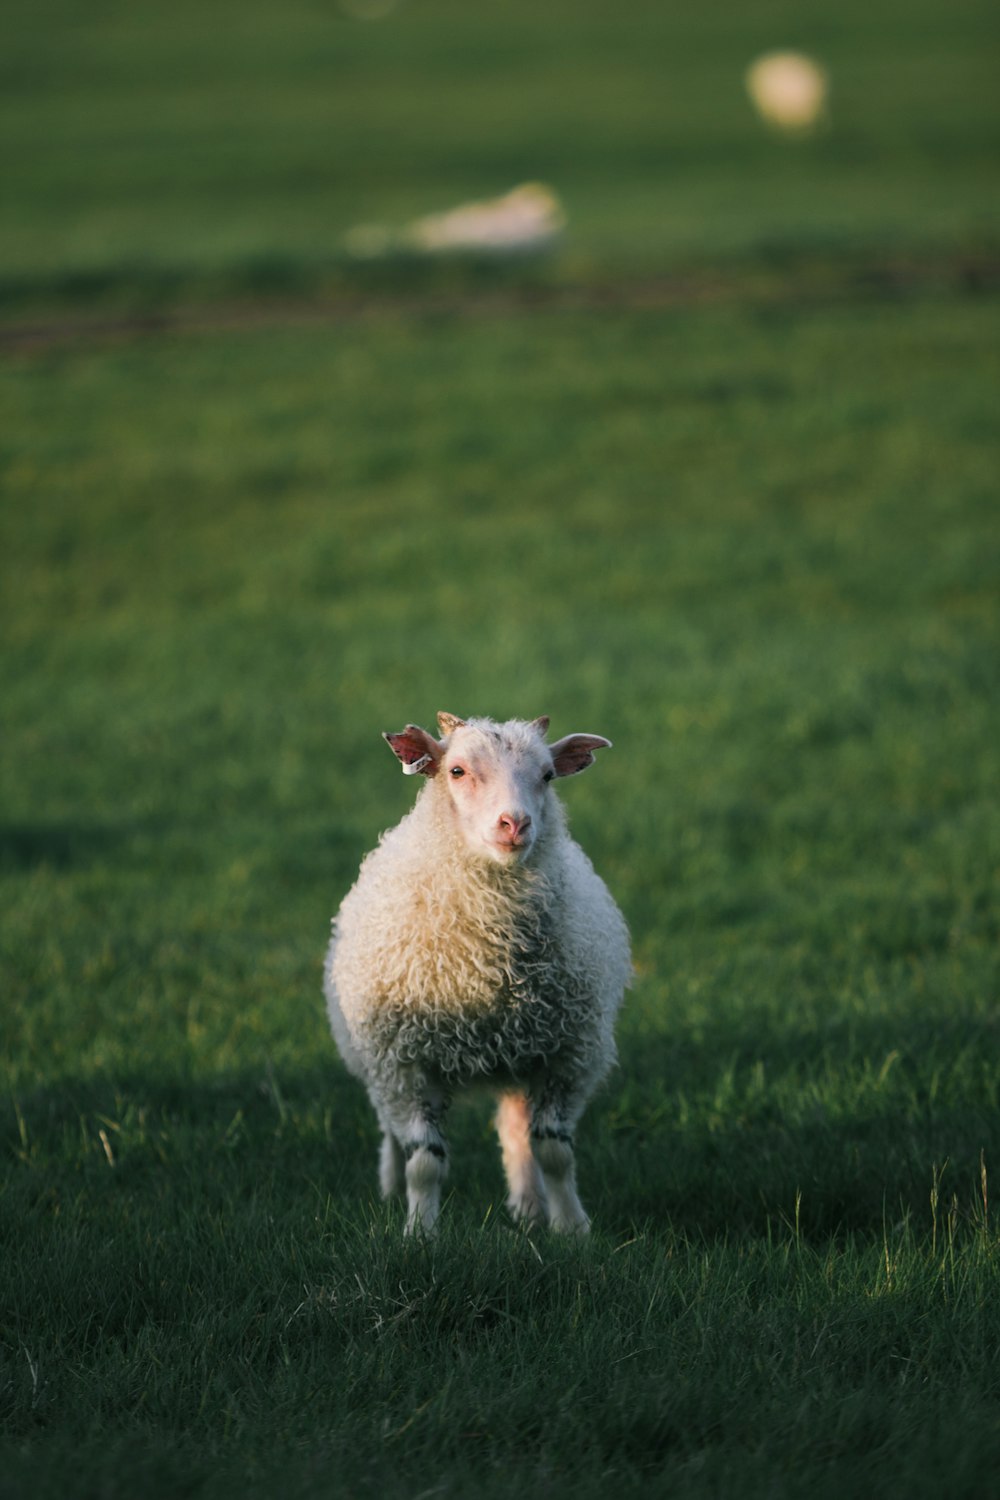 a sheep standing in a grassy field looking at the camera